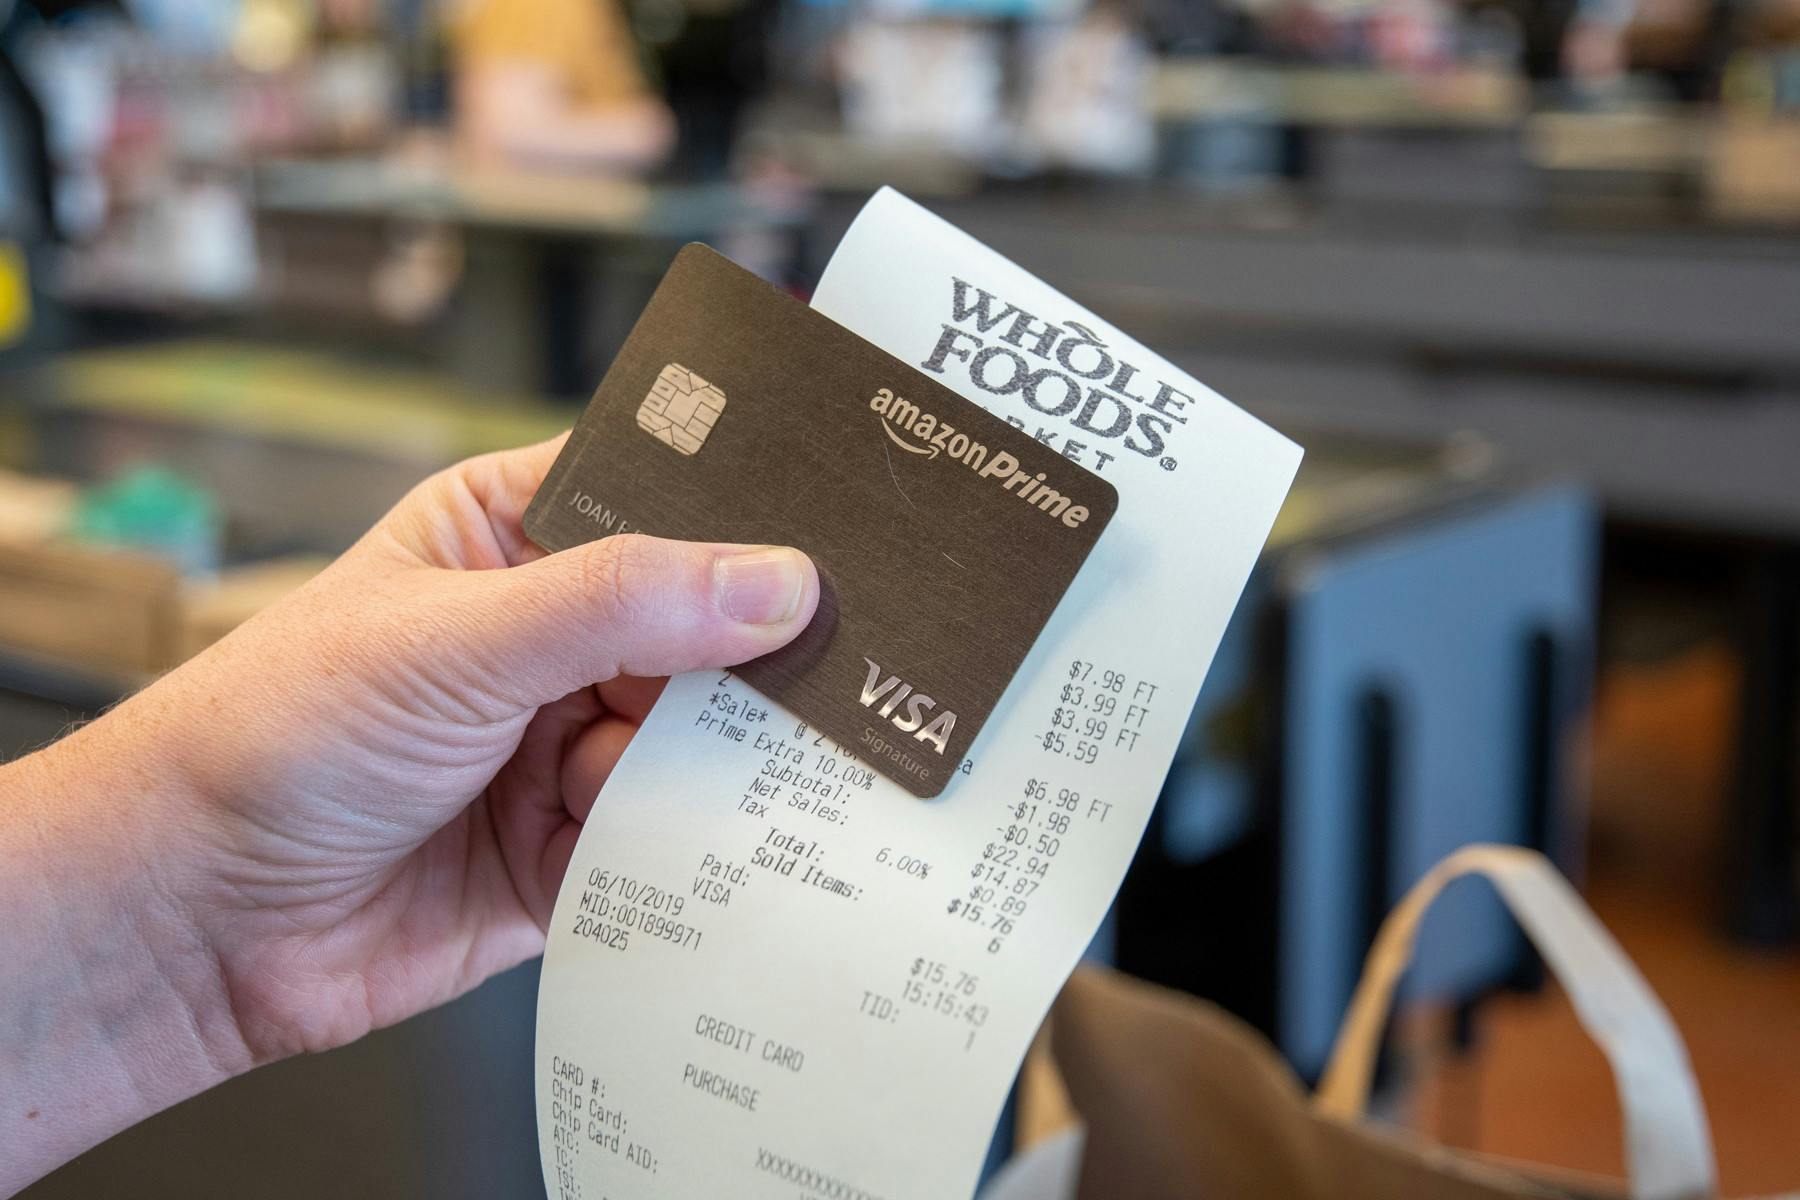 A hand holding an Amazon Prime Visa credit card and a Whole Foods receipt.